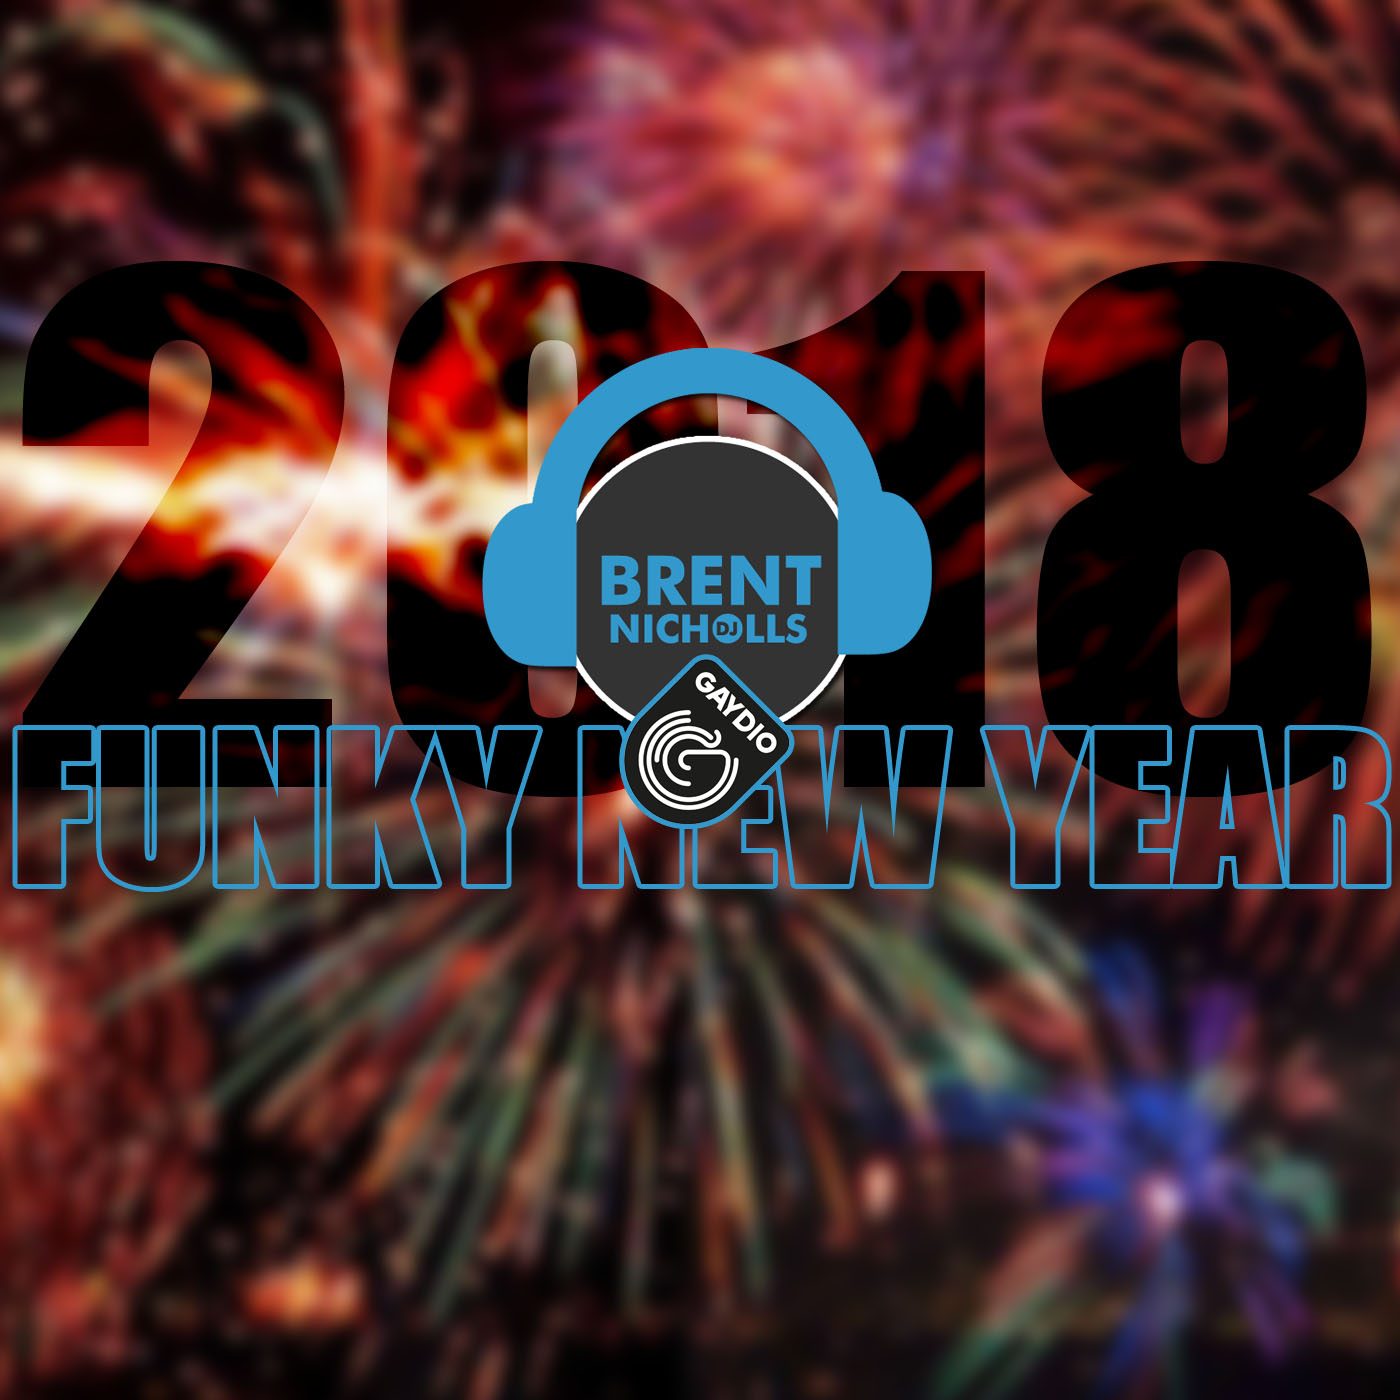 PODCAST: GAYDIO FUNKY NEW YEAR 2017/18